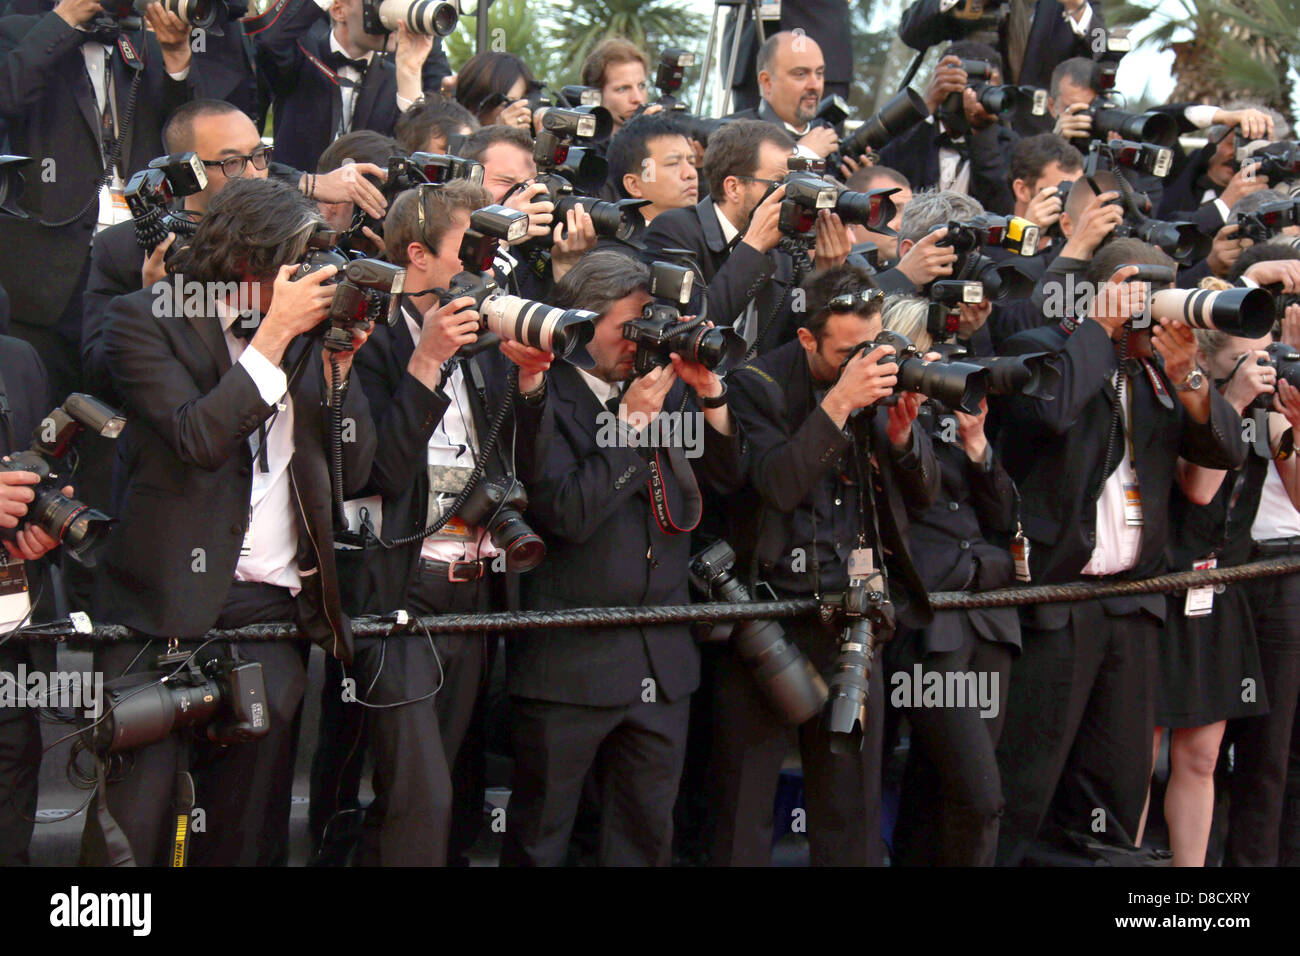 Photographers working at the premiere of 'The Immigrant' during the the 66th Cannes International Film Festival at Palais des Festivals in Cannes, France, on 24 May 2013. Photo: Hubert Boesl Stock Photo